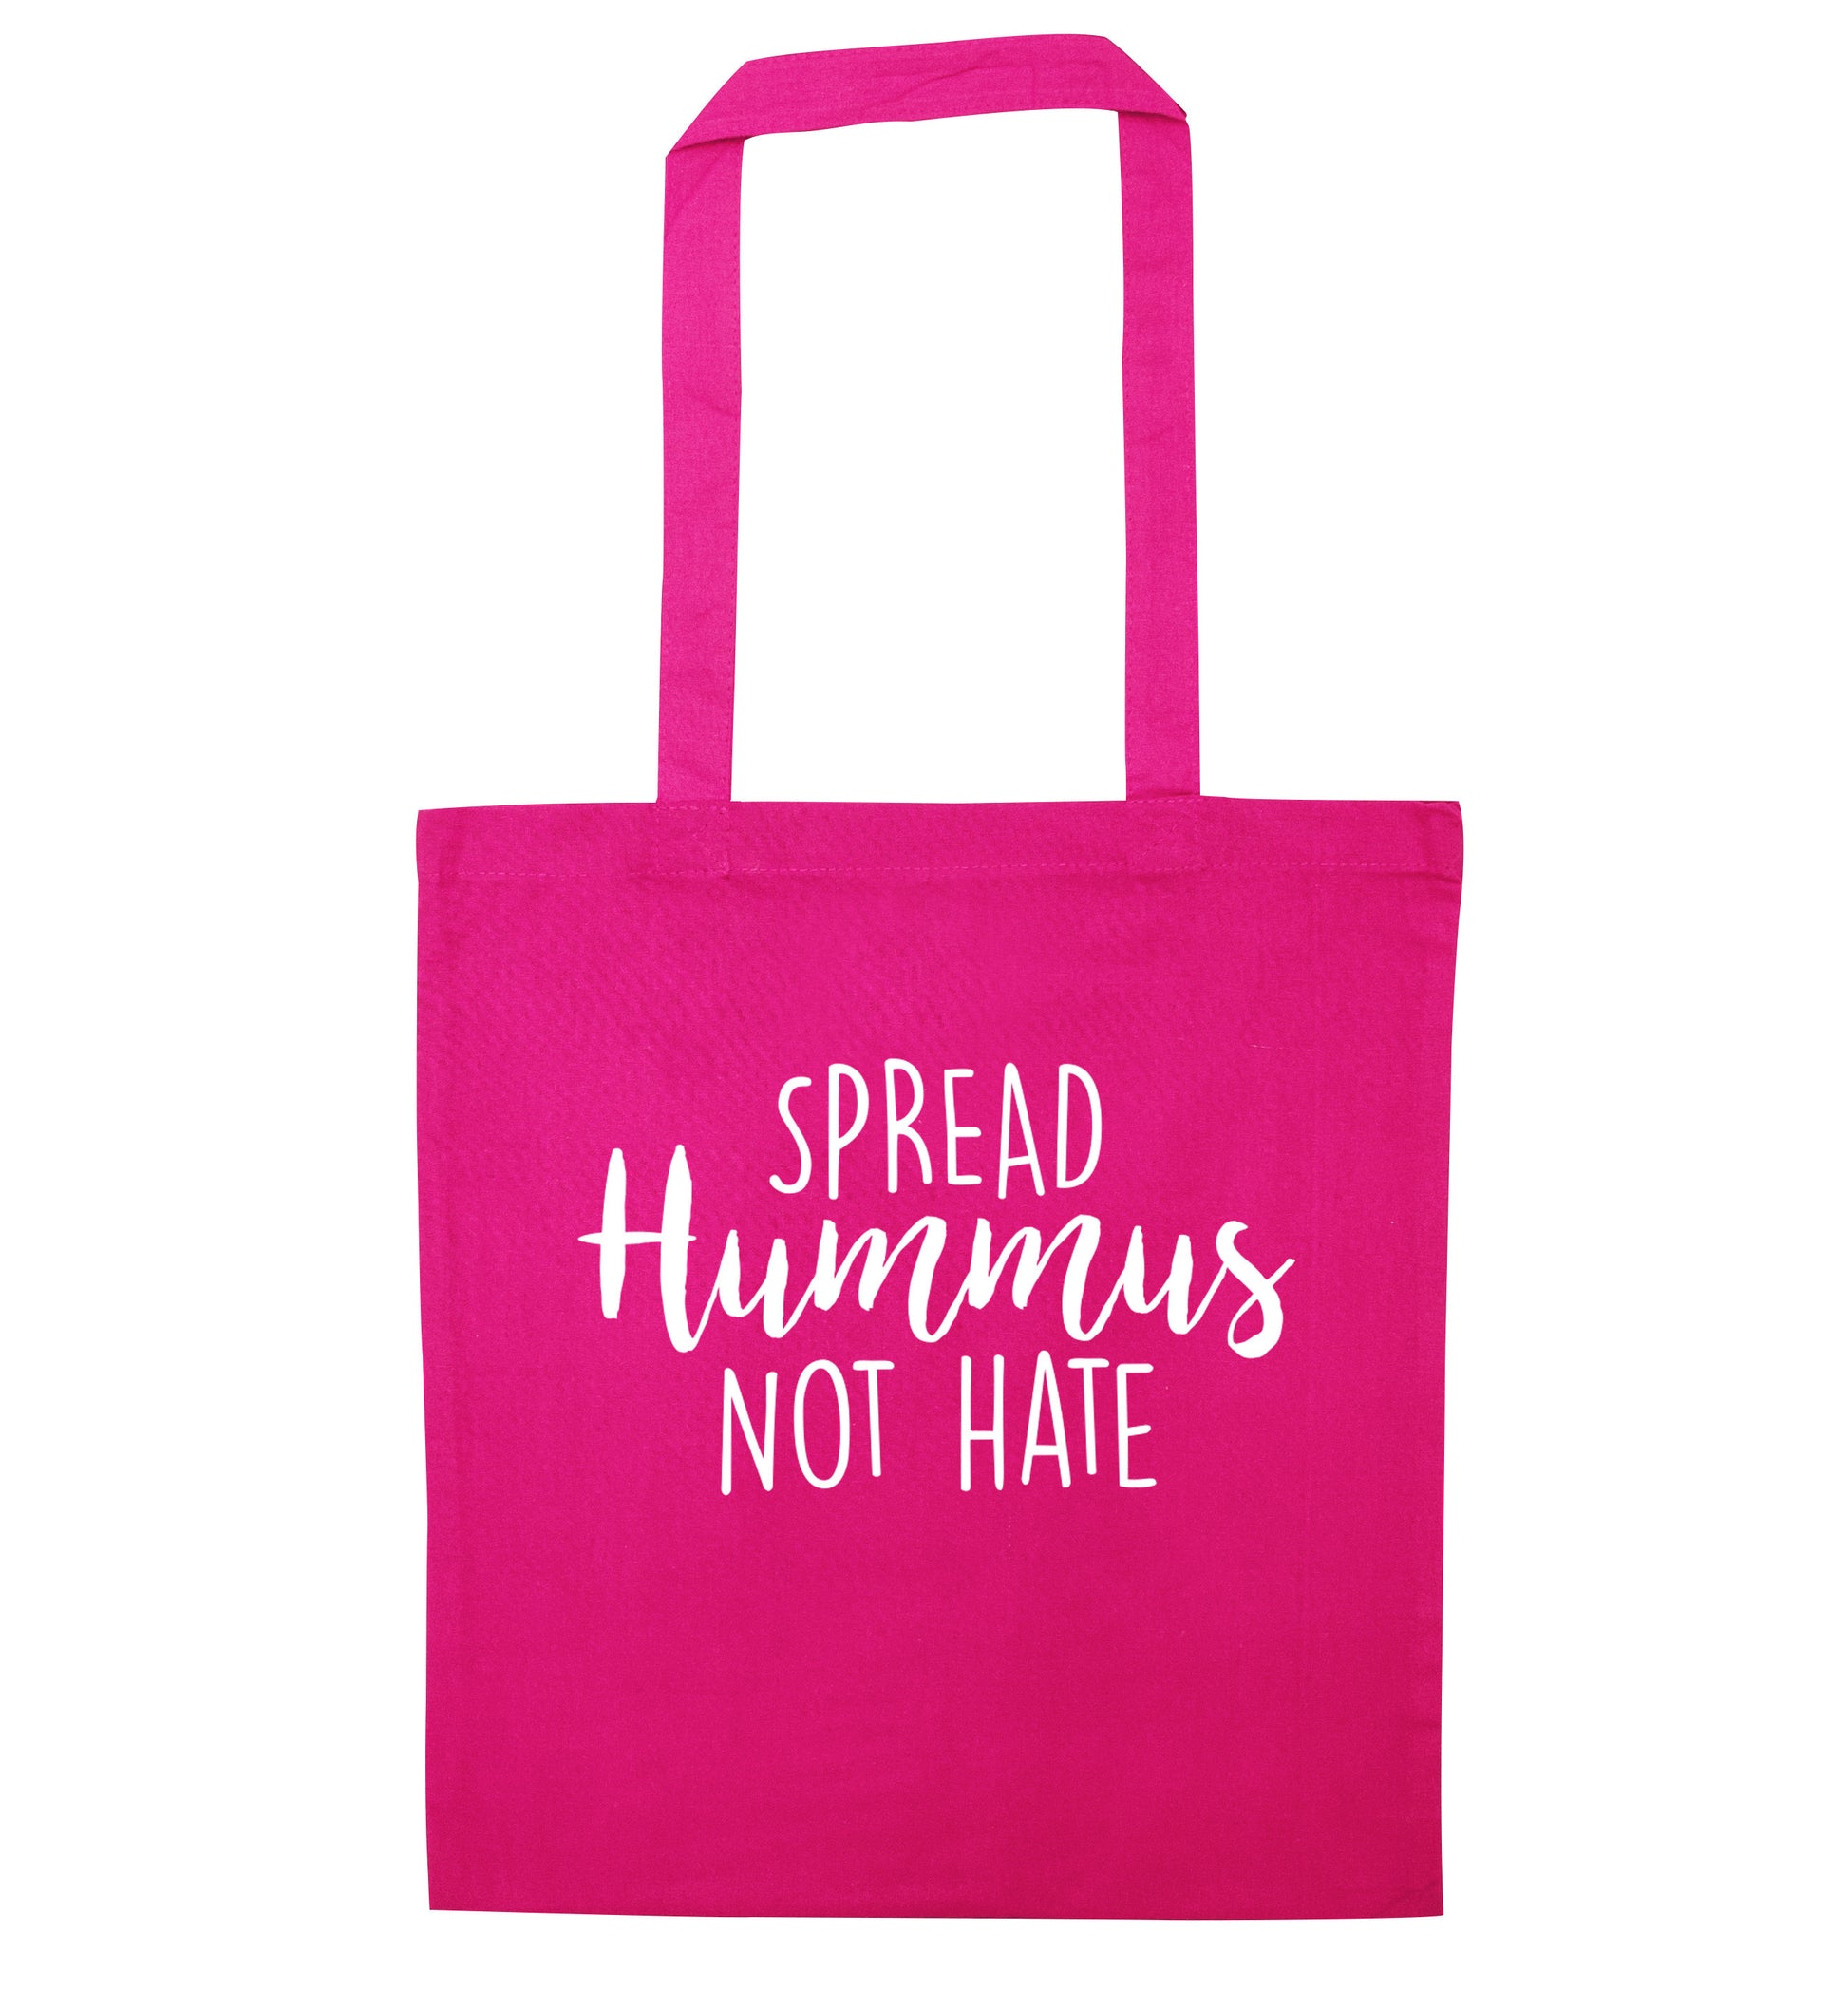 Spread hummus not hate script text pink tote bag